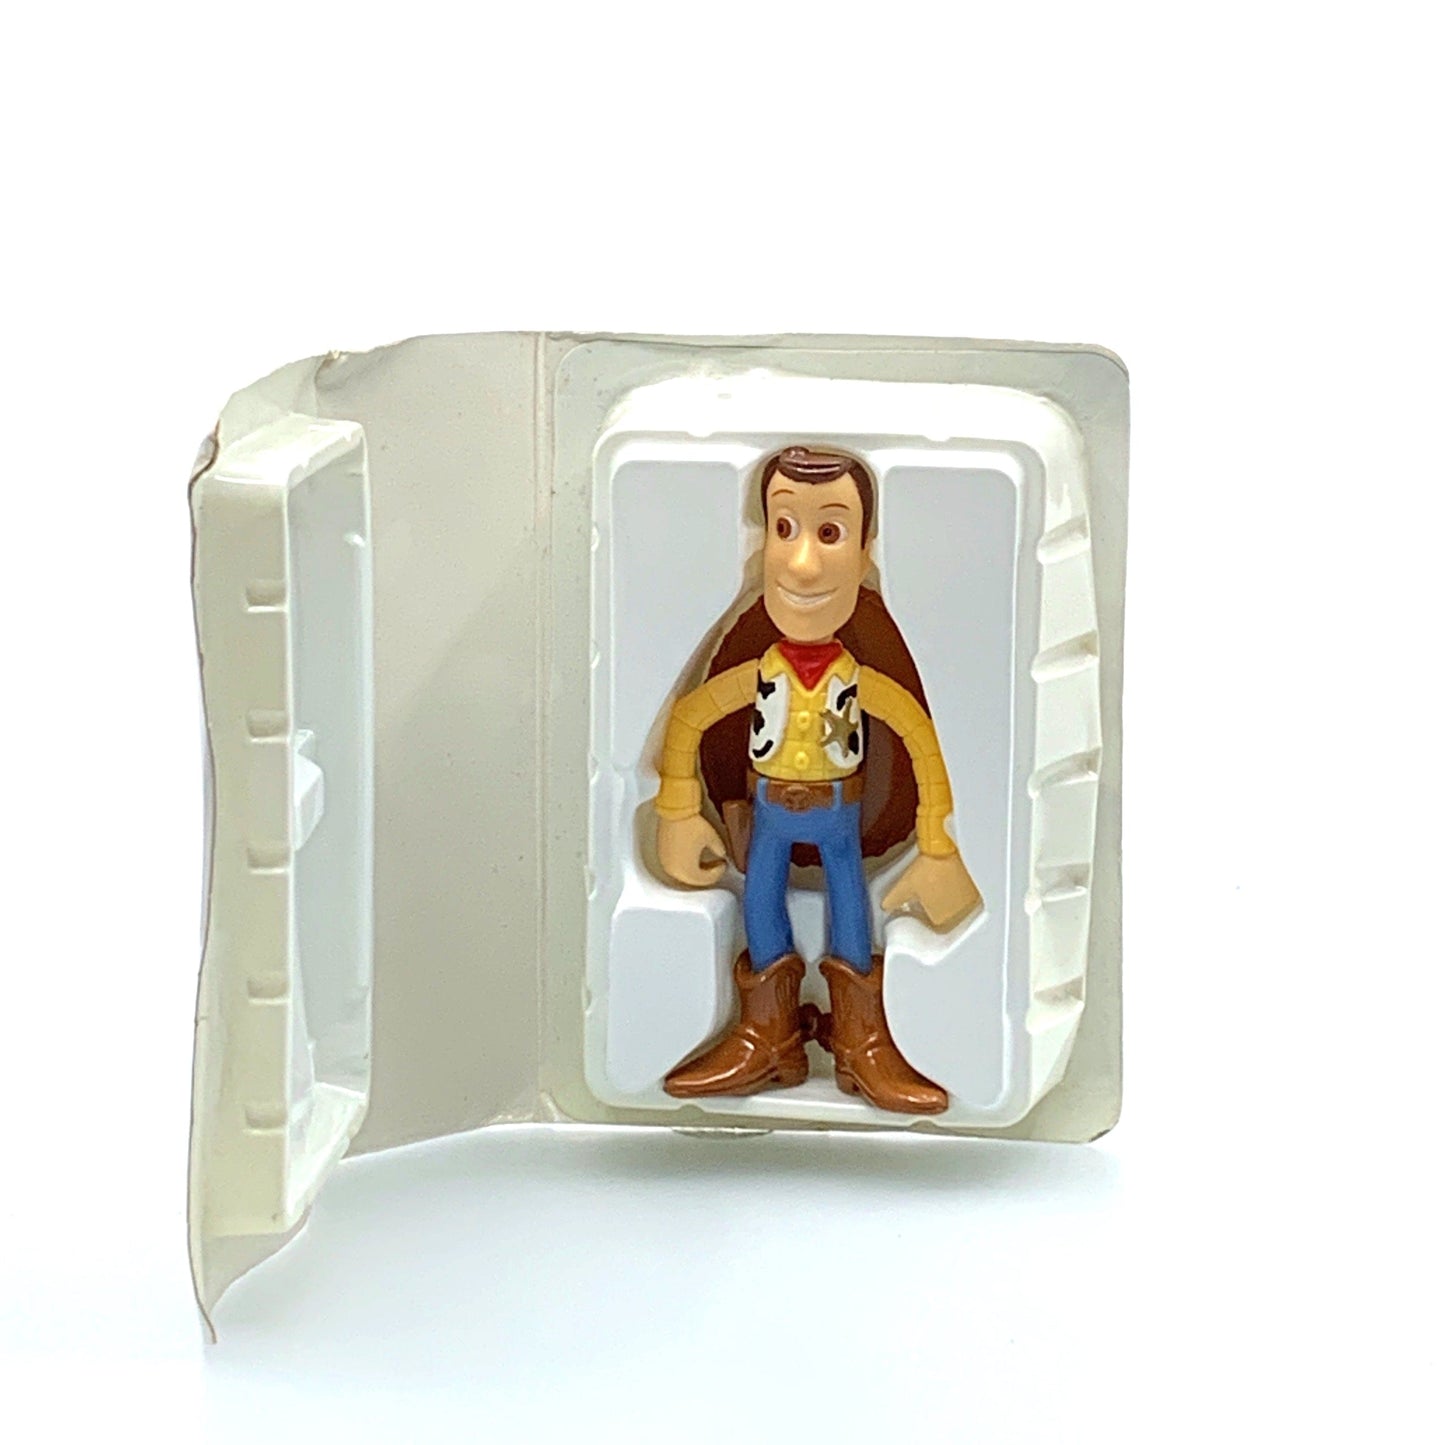 Vintage McDonalds Happy Meal Toy Story Woody Figurine in Box